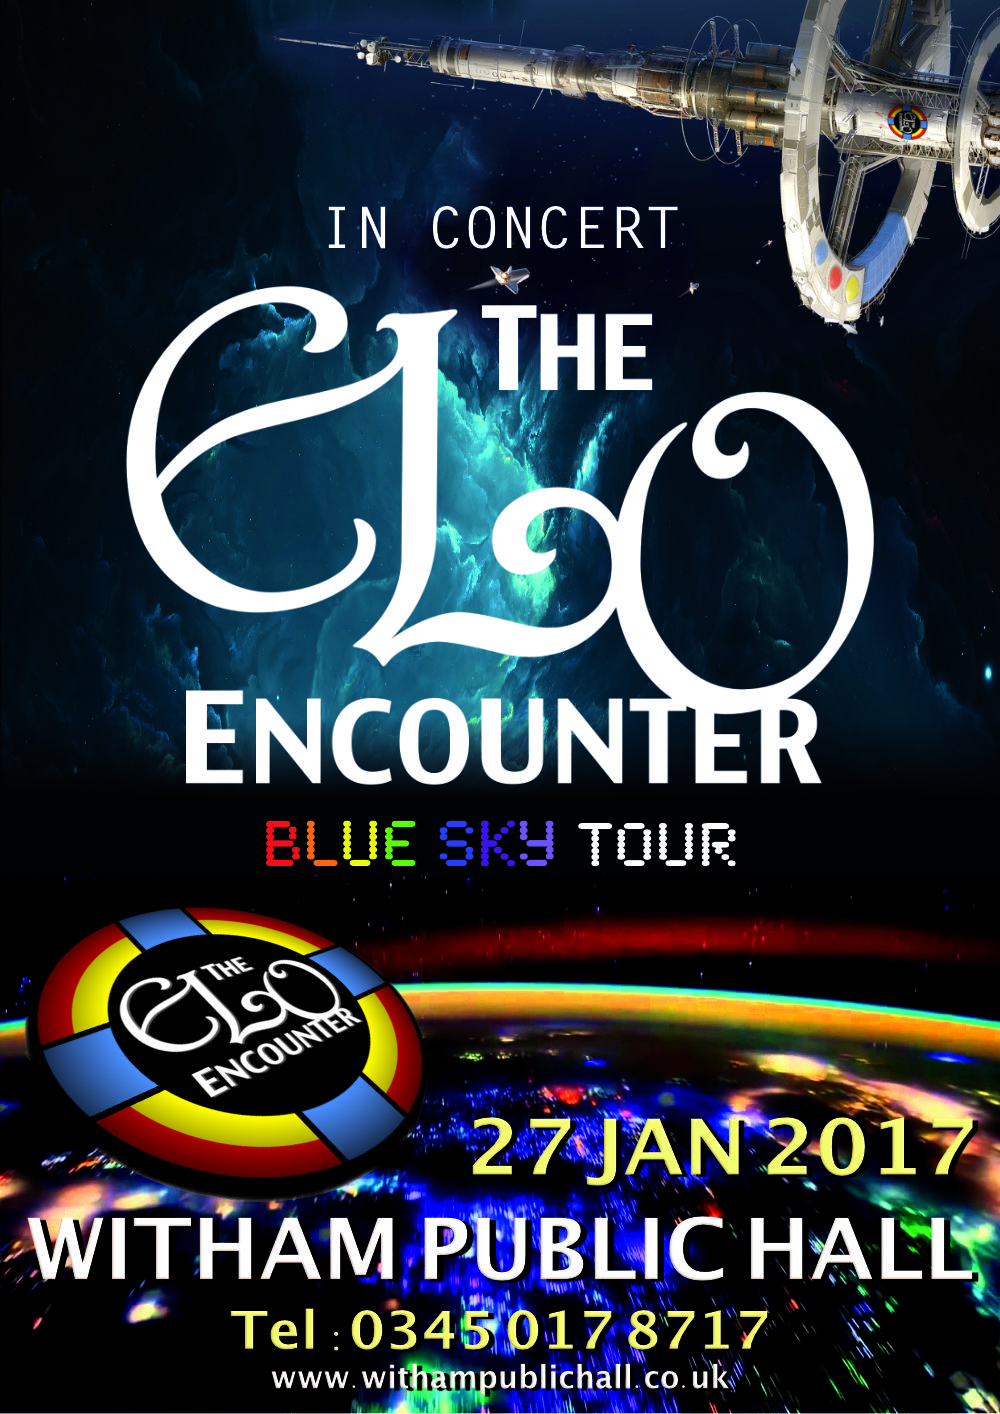 Witham Public Hall - ELO Encounter Tribute Poster